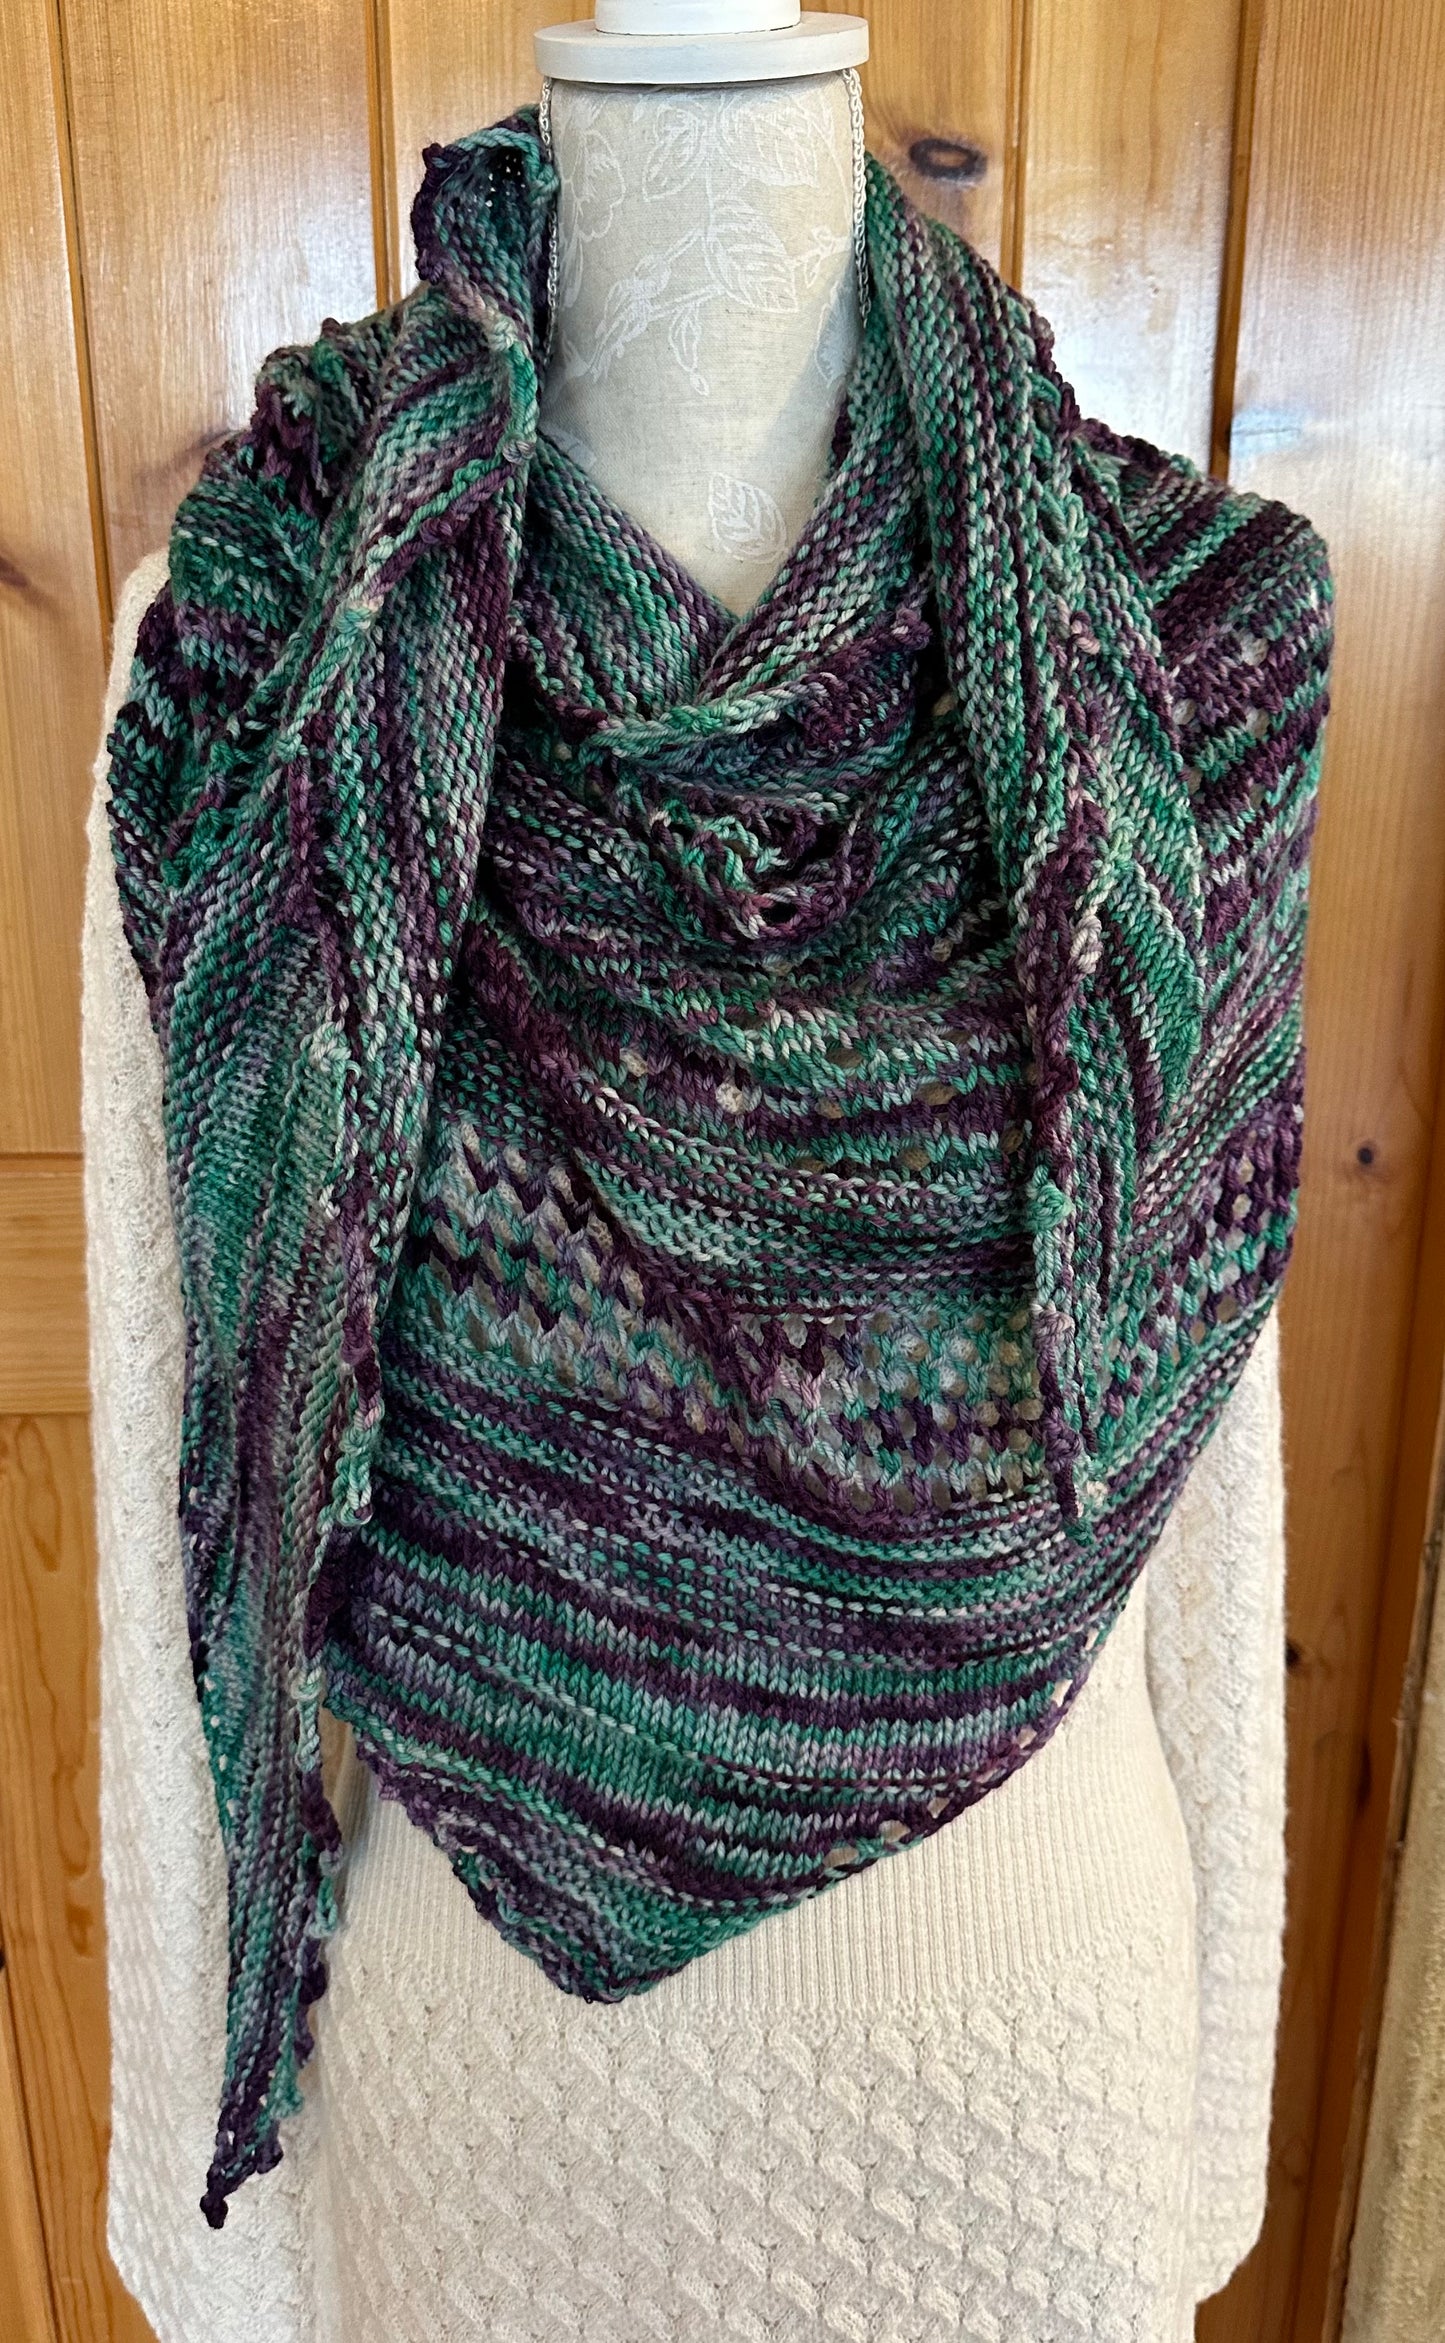 Shawl/Wrap/Lace Scarf in Peacock